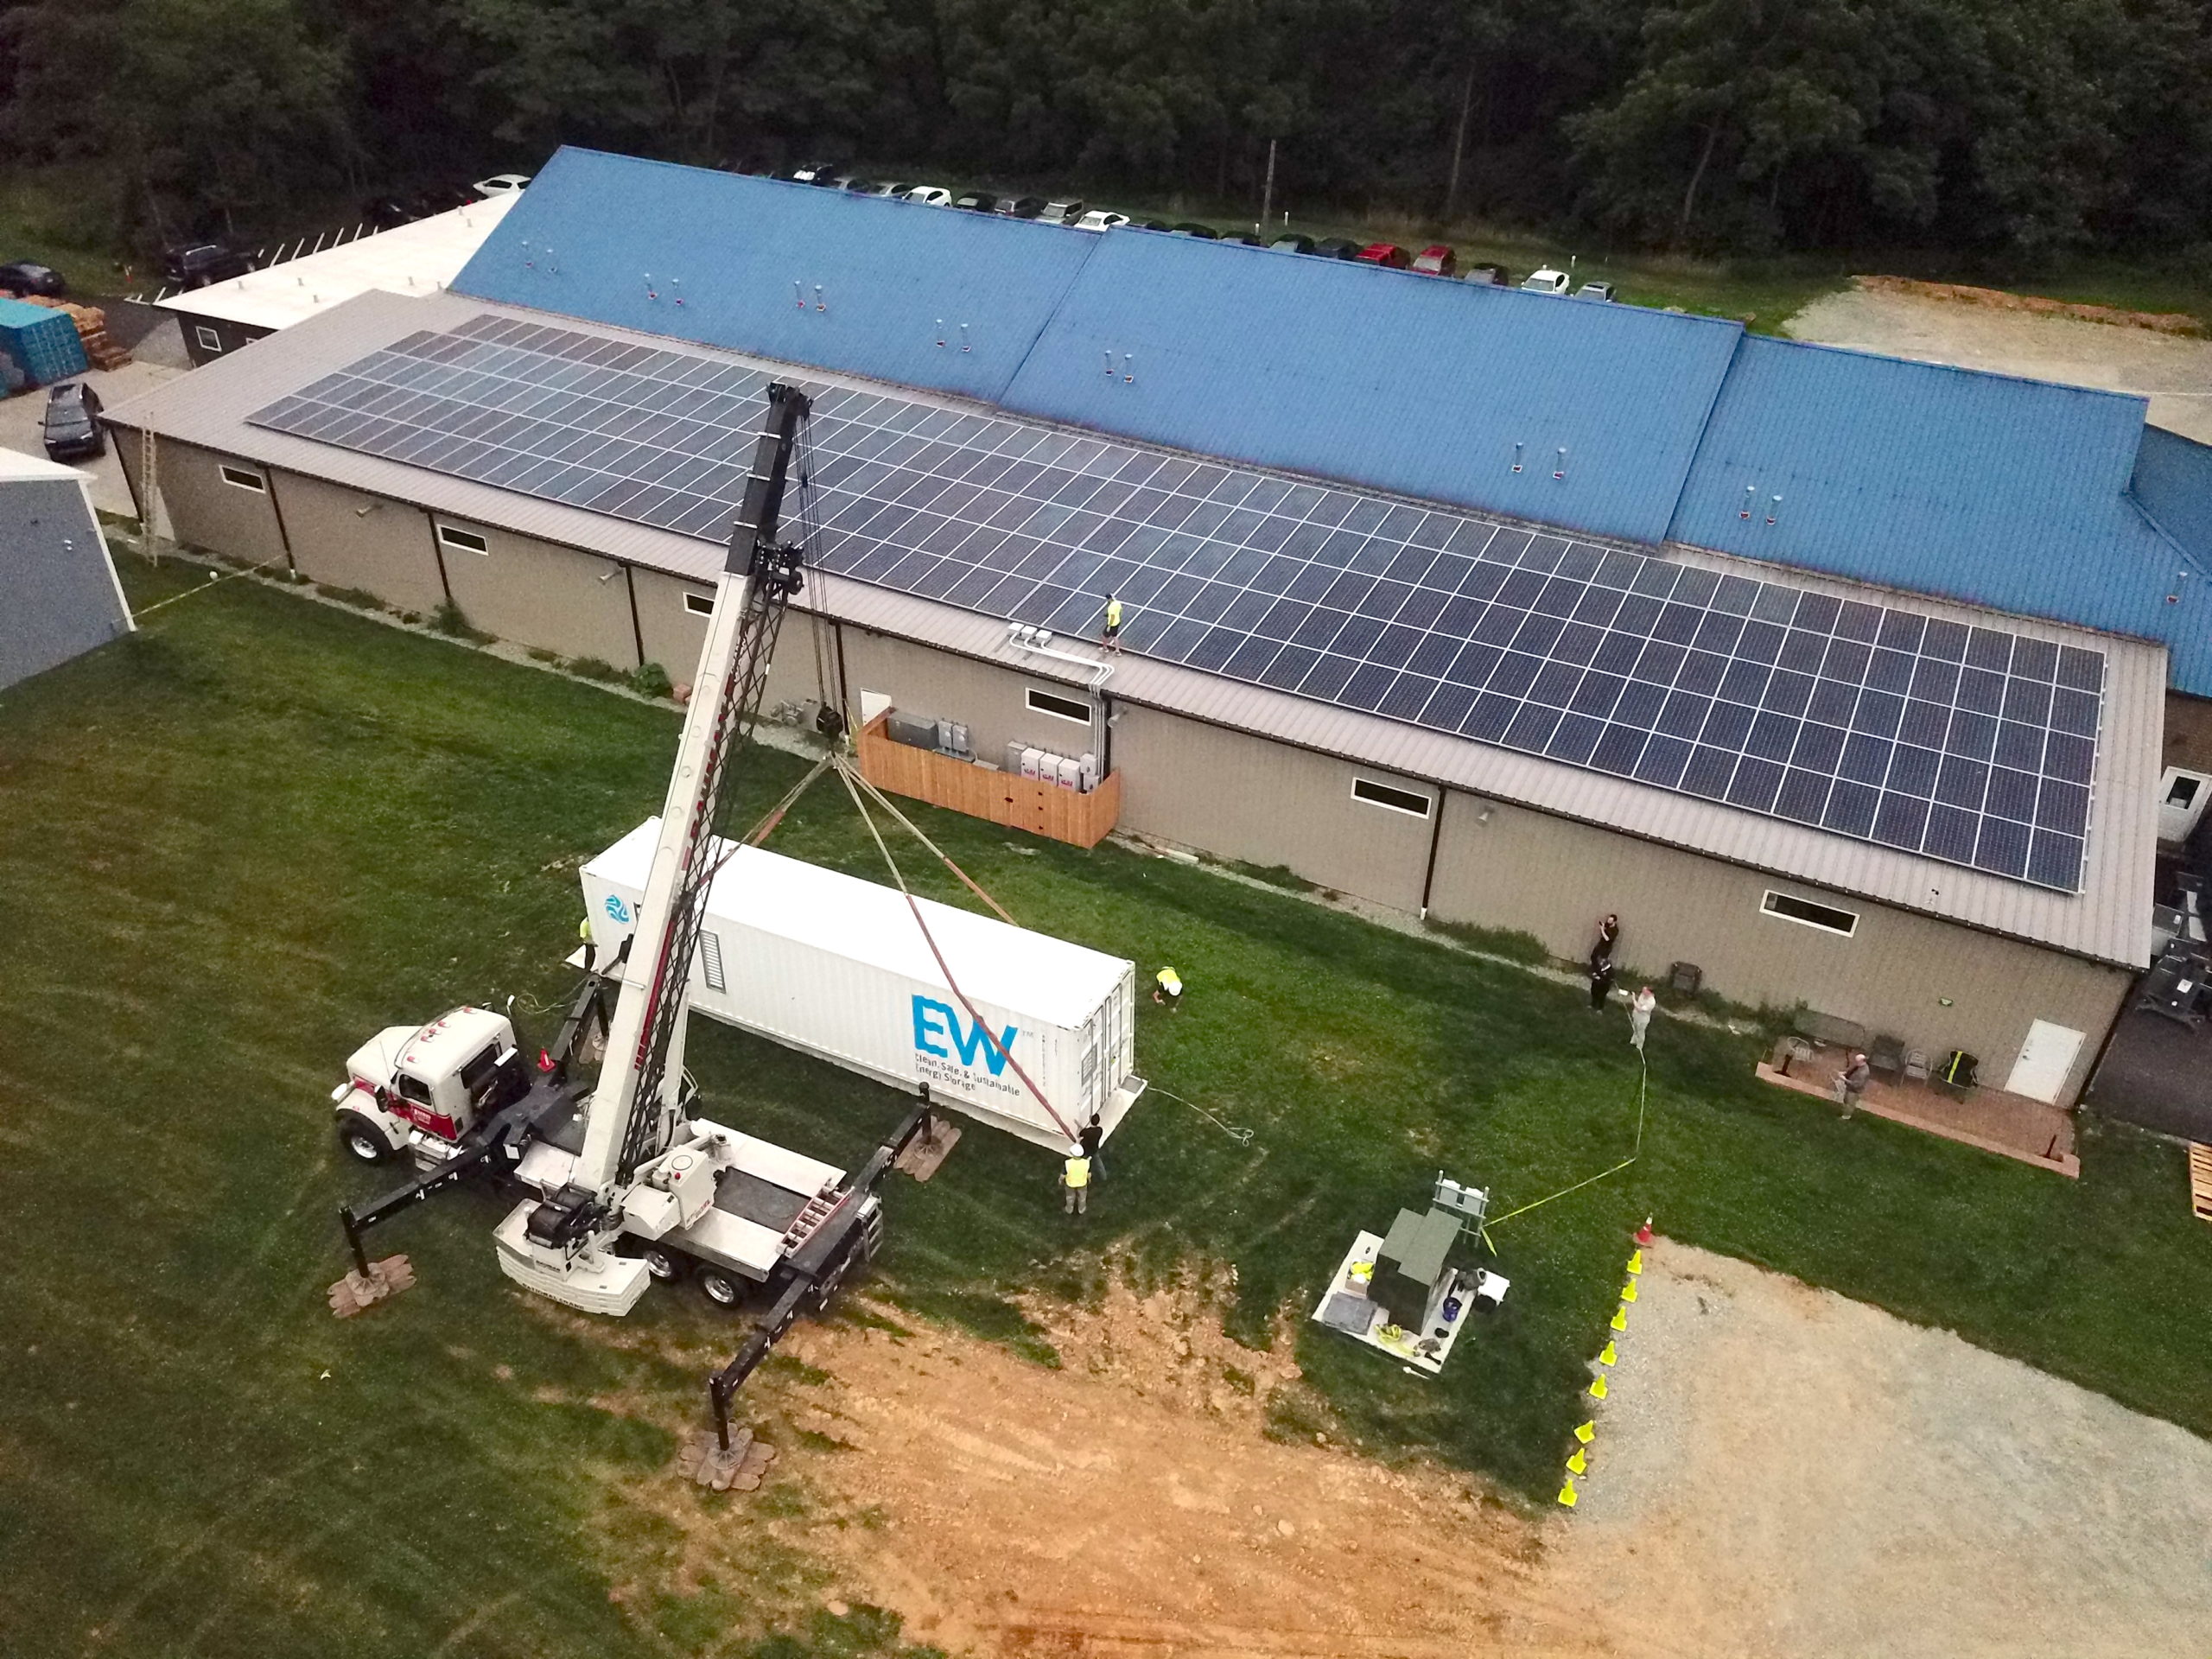 A state-of-the-art microgrid installation at Sycamore International by CE+T